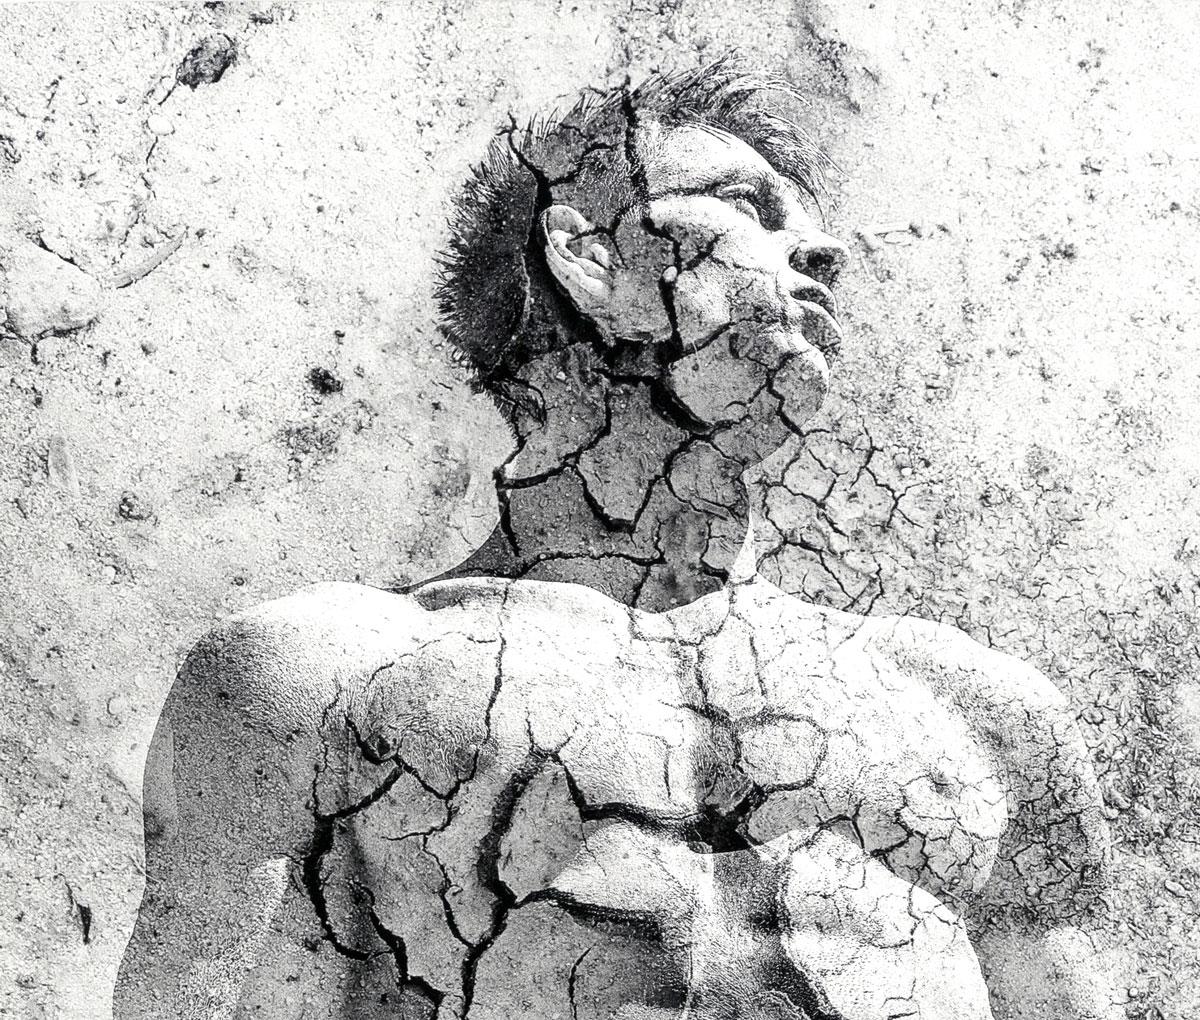 Dry Earth Sculpture (young nude male photo superimposed on cracked earth photo) - Photograph by Benno Thoma